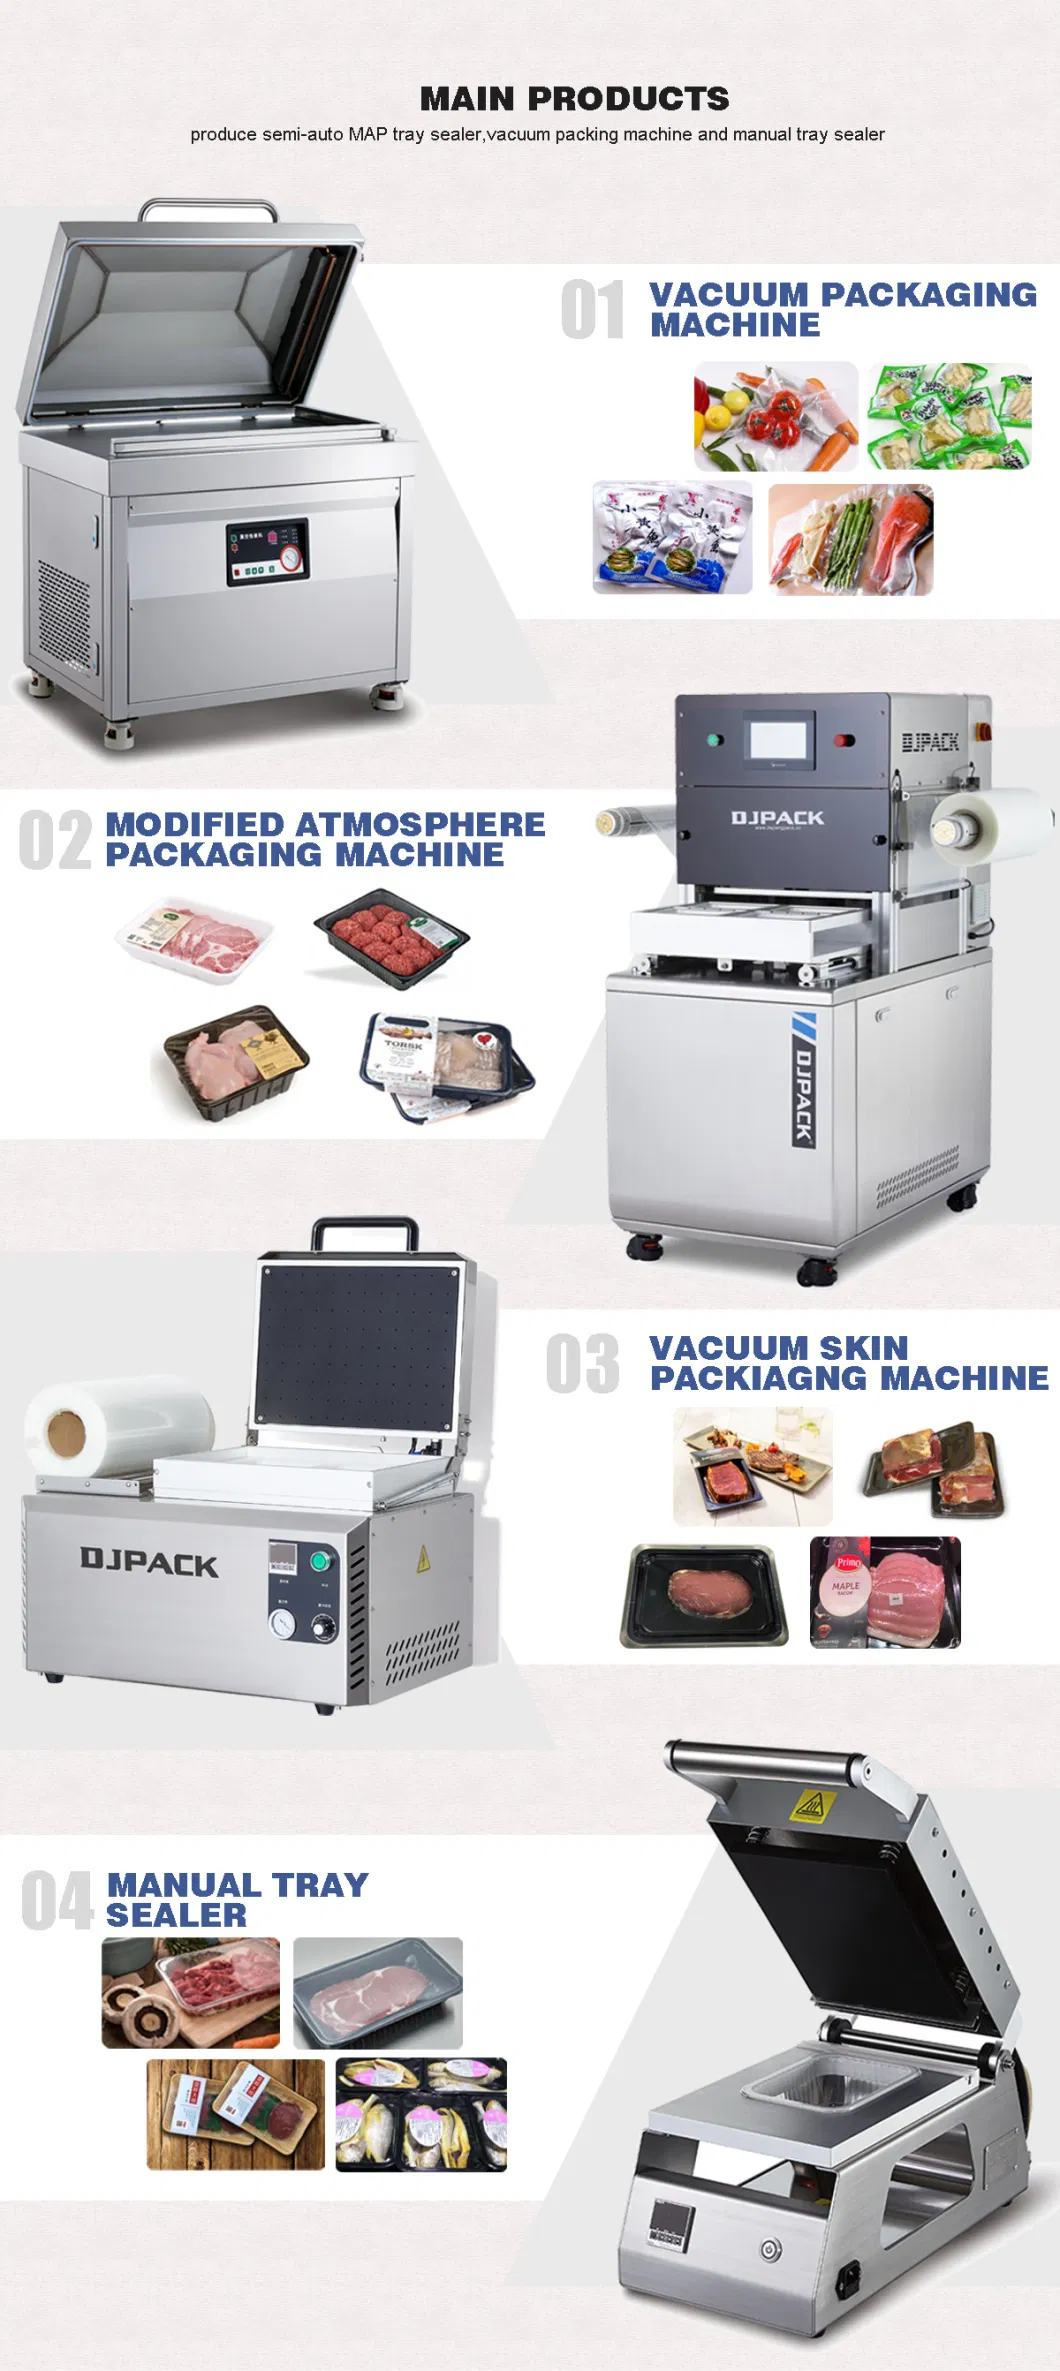 Vacuum Map Tray Sealer Packaging Machine for Packing Meat, Seafood, Dairy Product